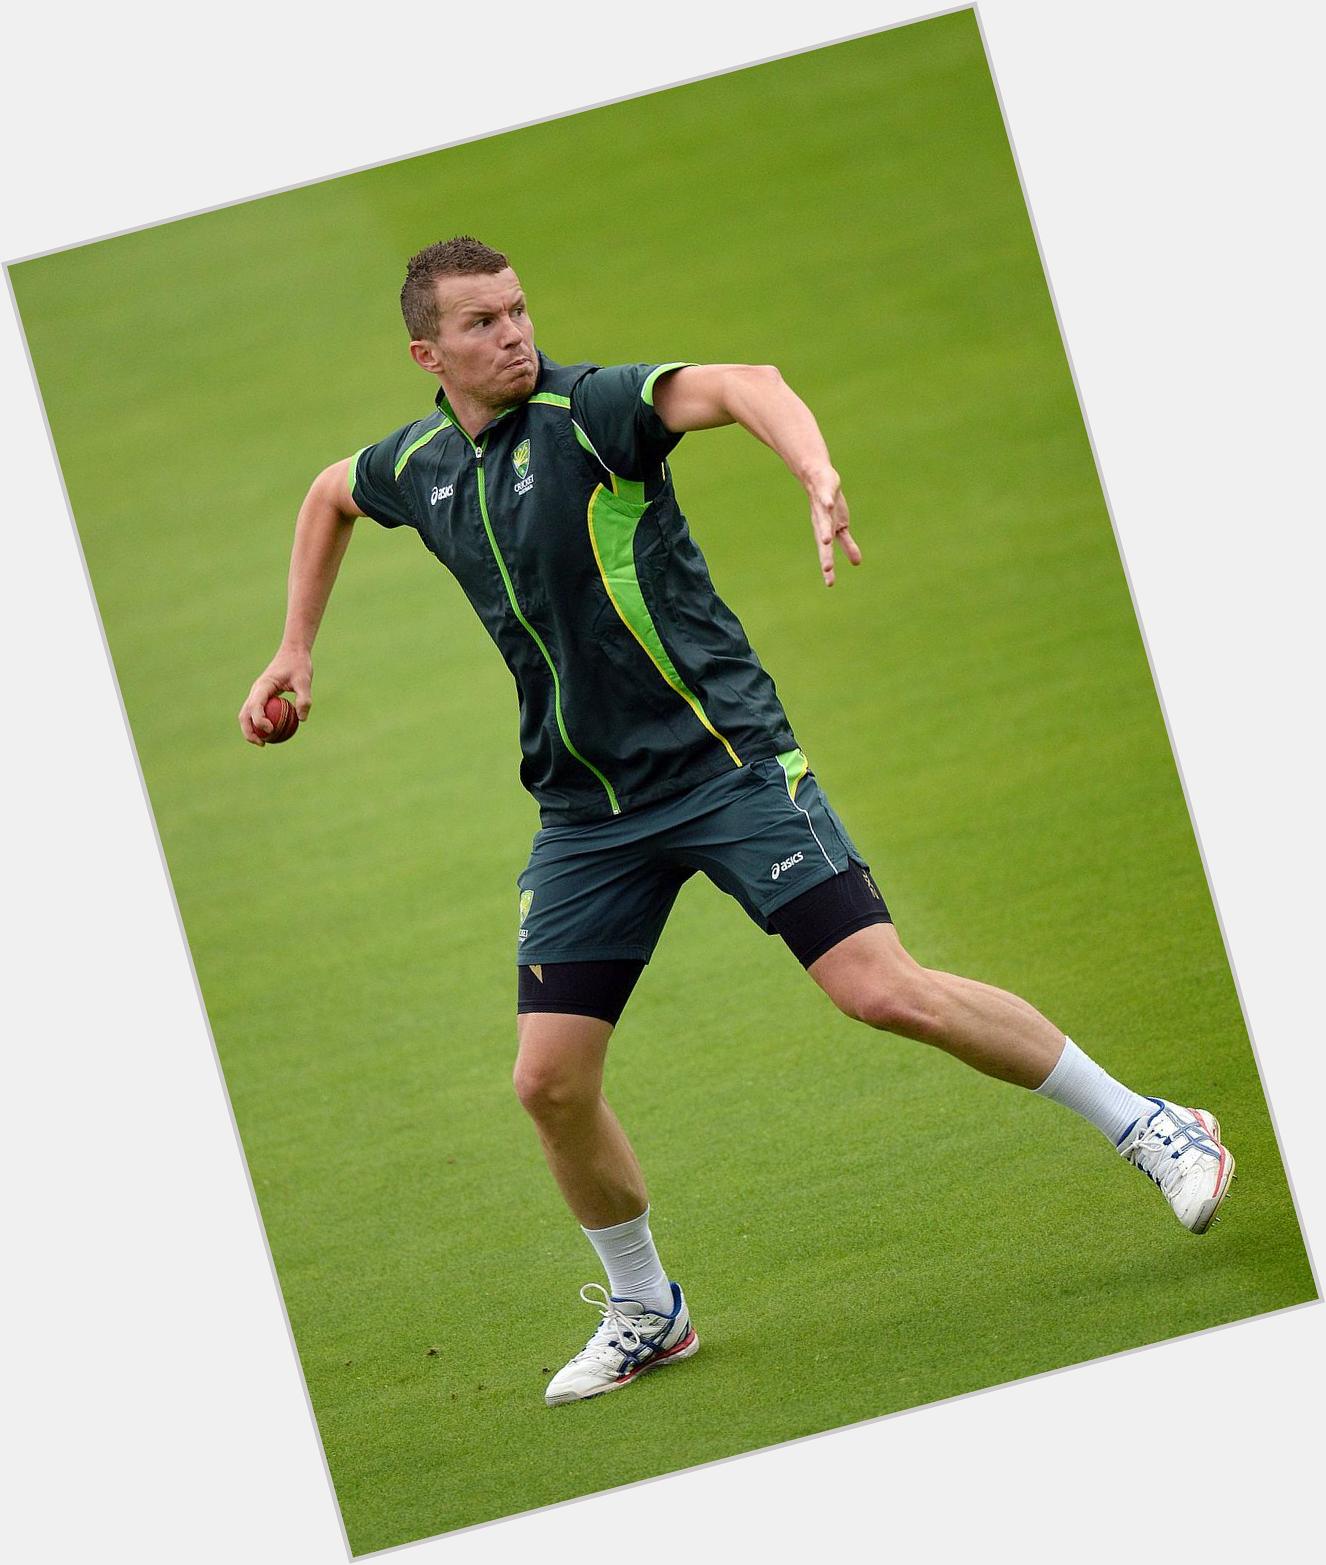 Peter Siddle dating 2.jpg